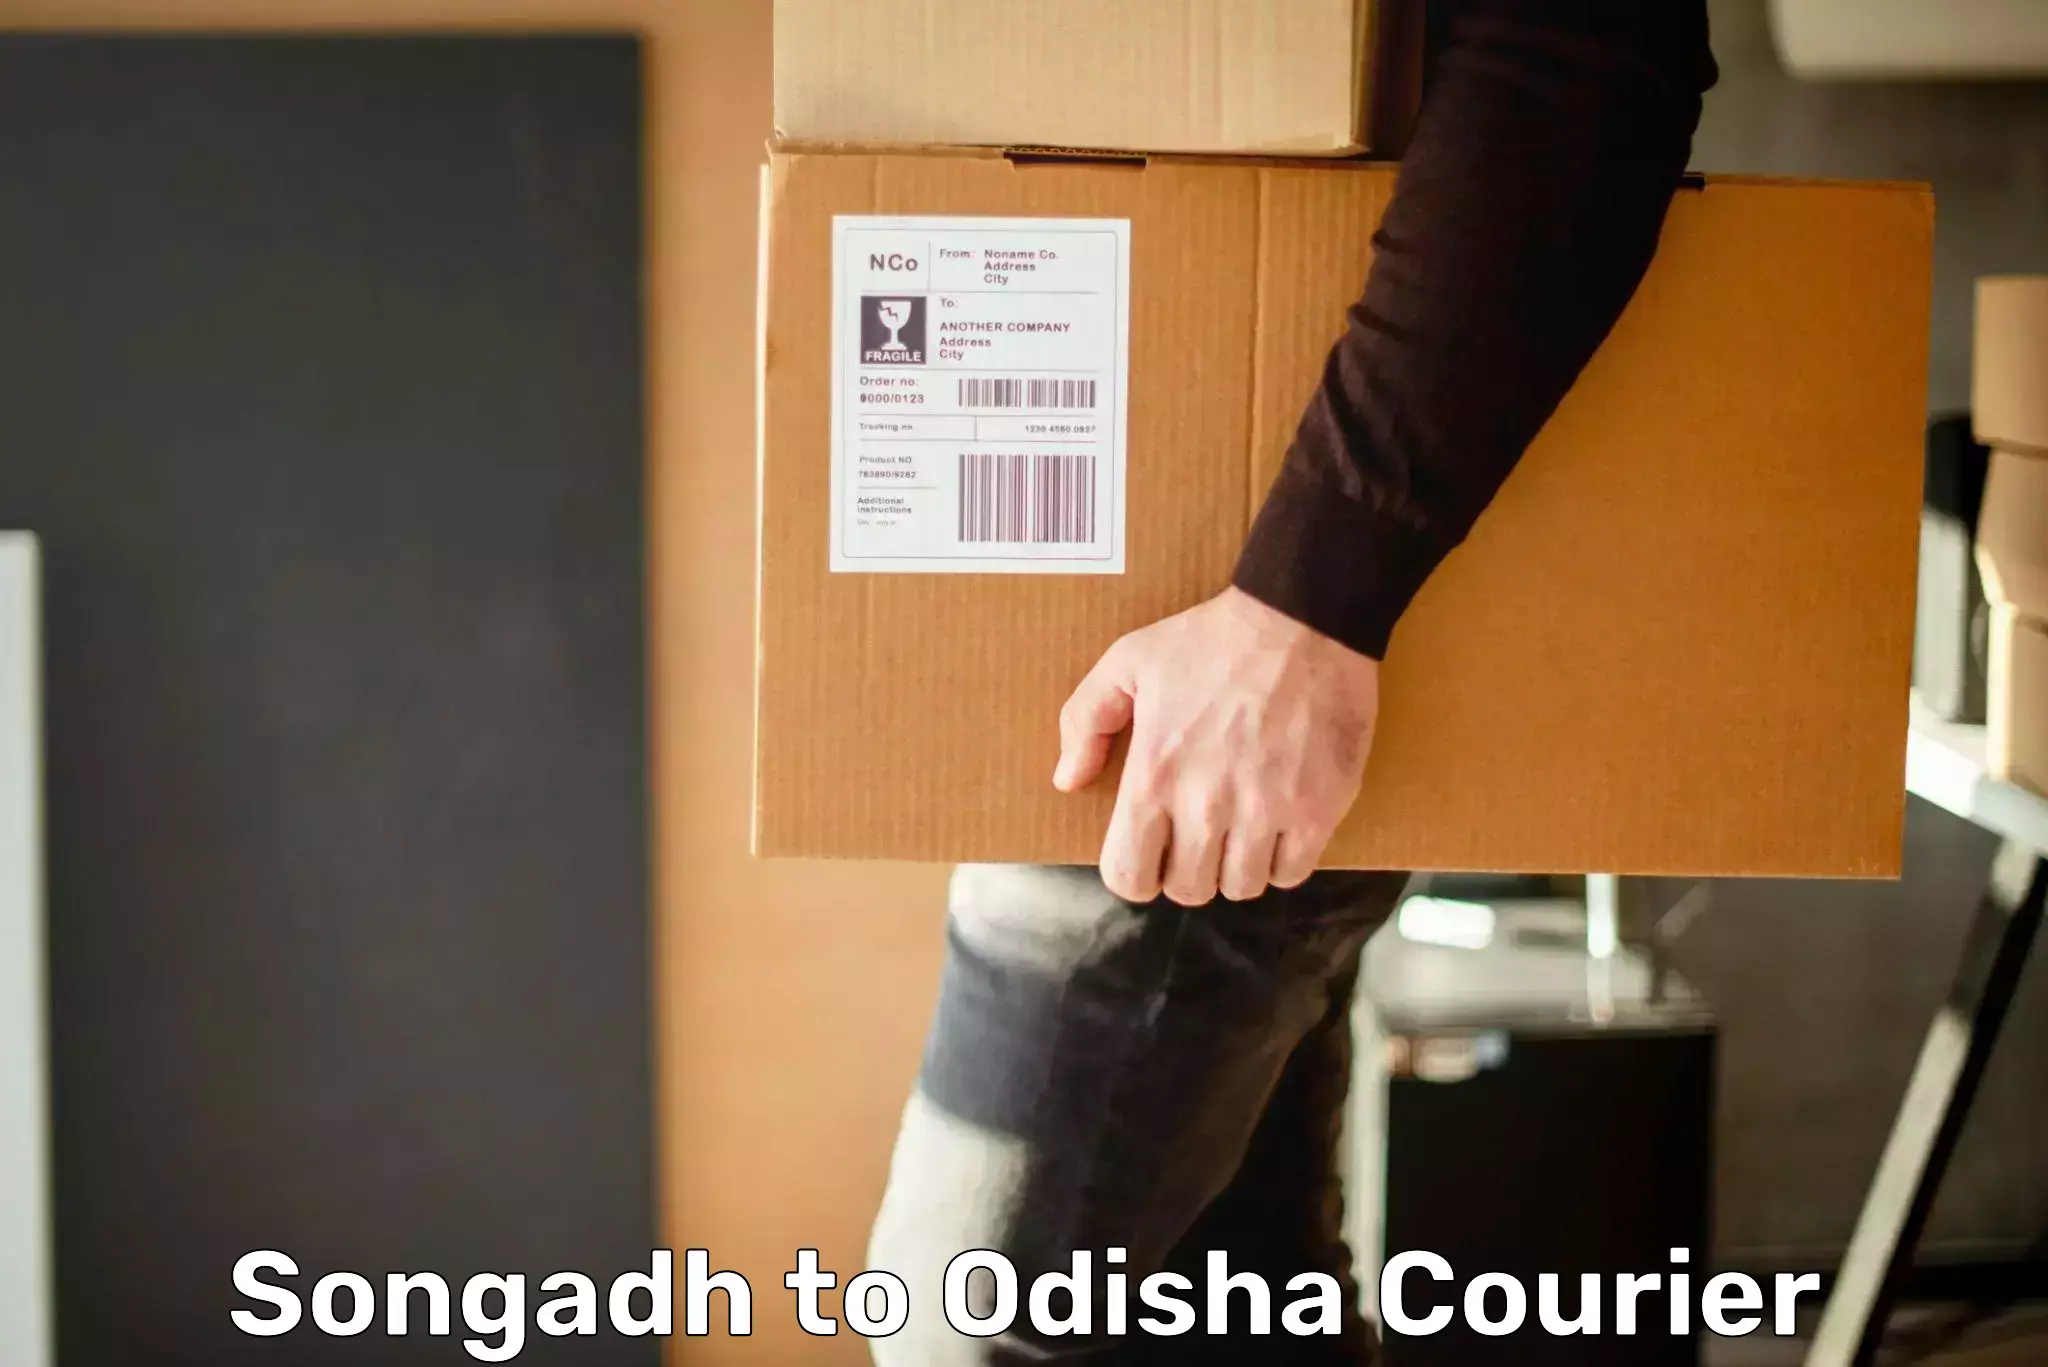 Courier service efficiency Songadh to Birmaharajpur